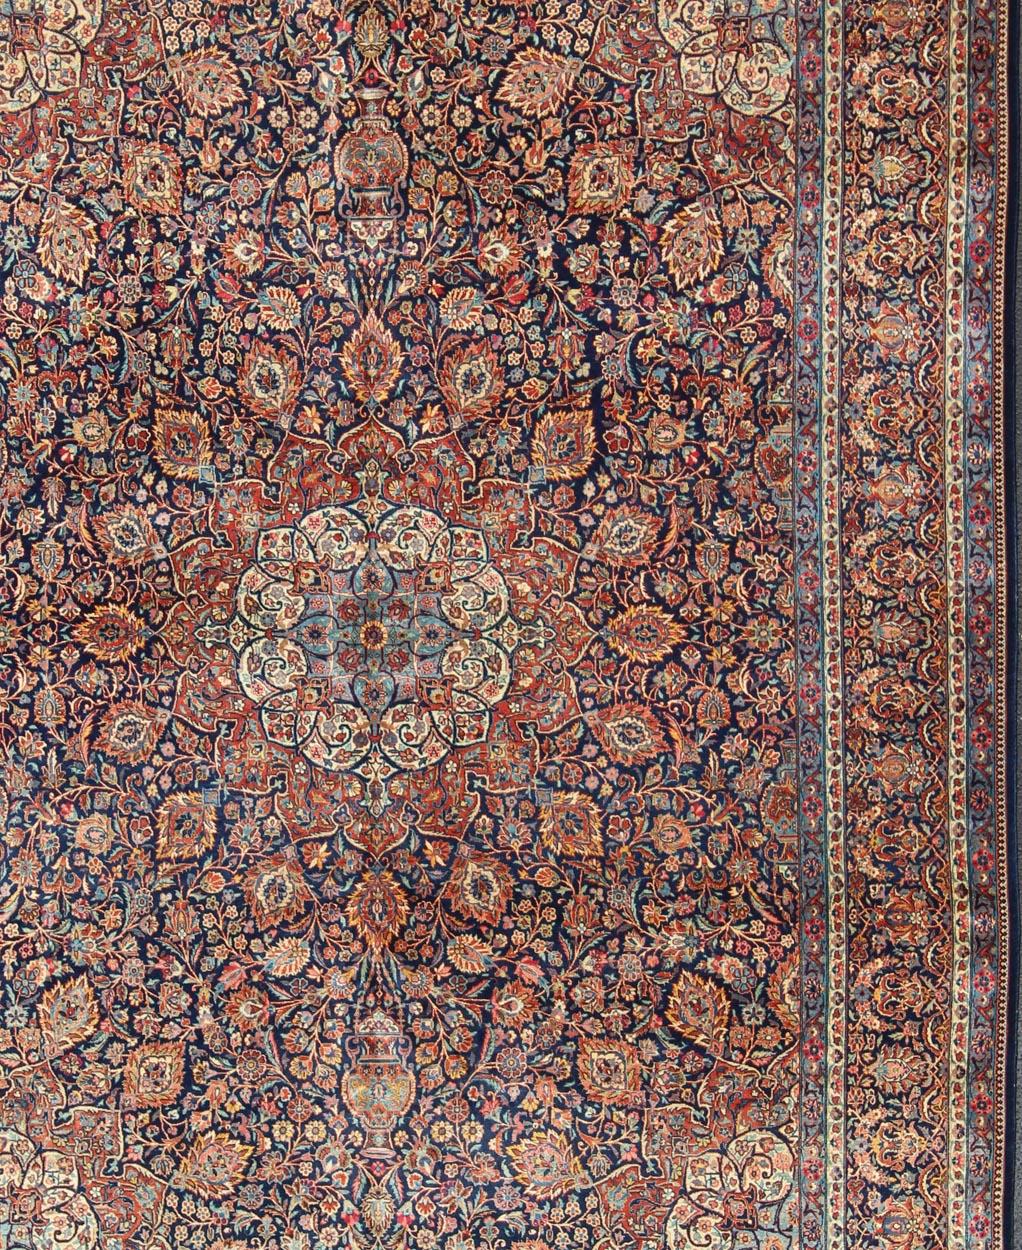 Fine Kashan red and blue antique Persian Kashan rug with Arabesque blossom design, rug EB-CON1-13001, country of origin / type: Iran / Kashan, circa 1910

Distinct colors that are similar yet starkly rendered flow alongside each other in this